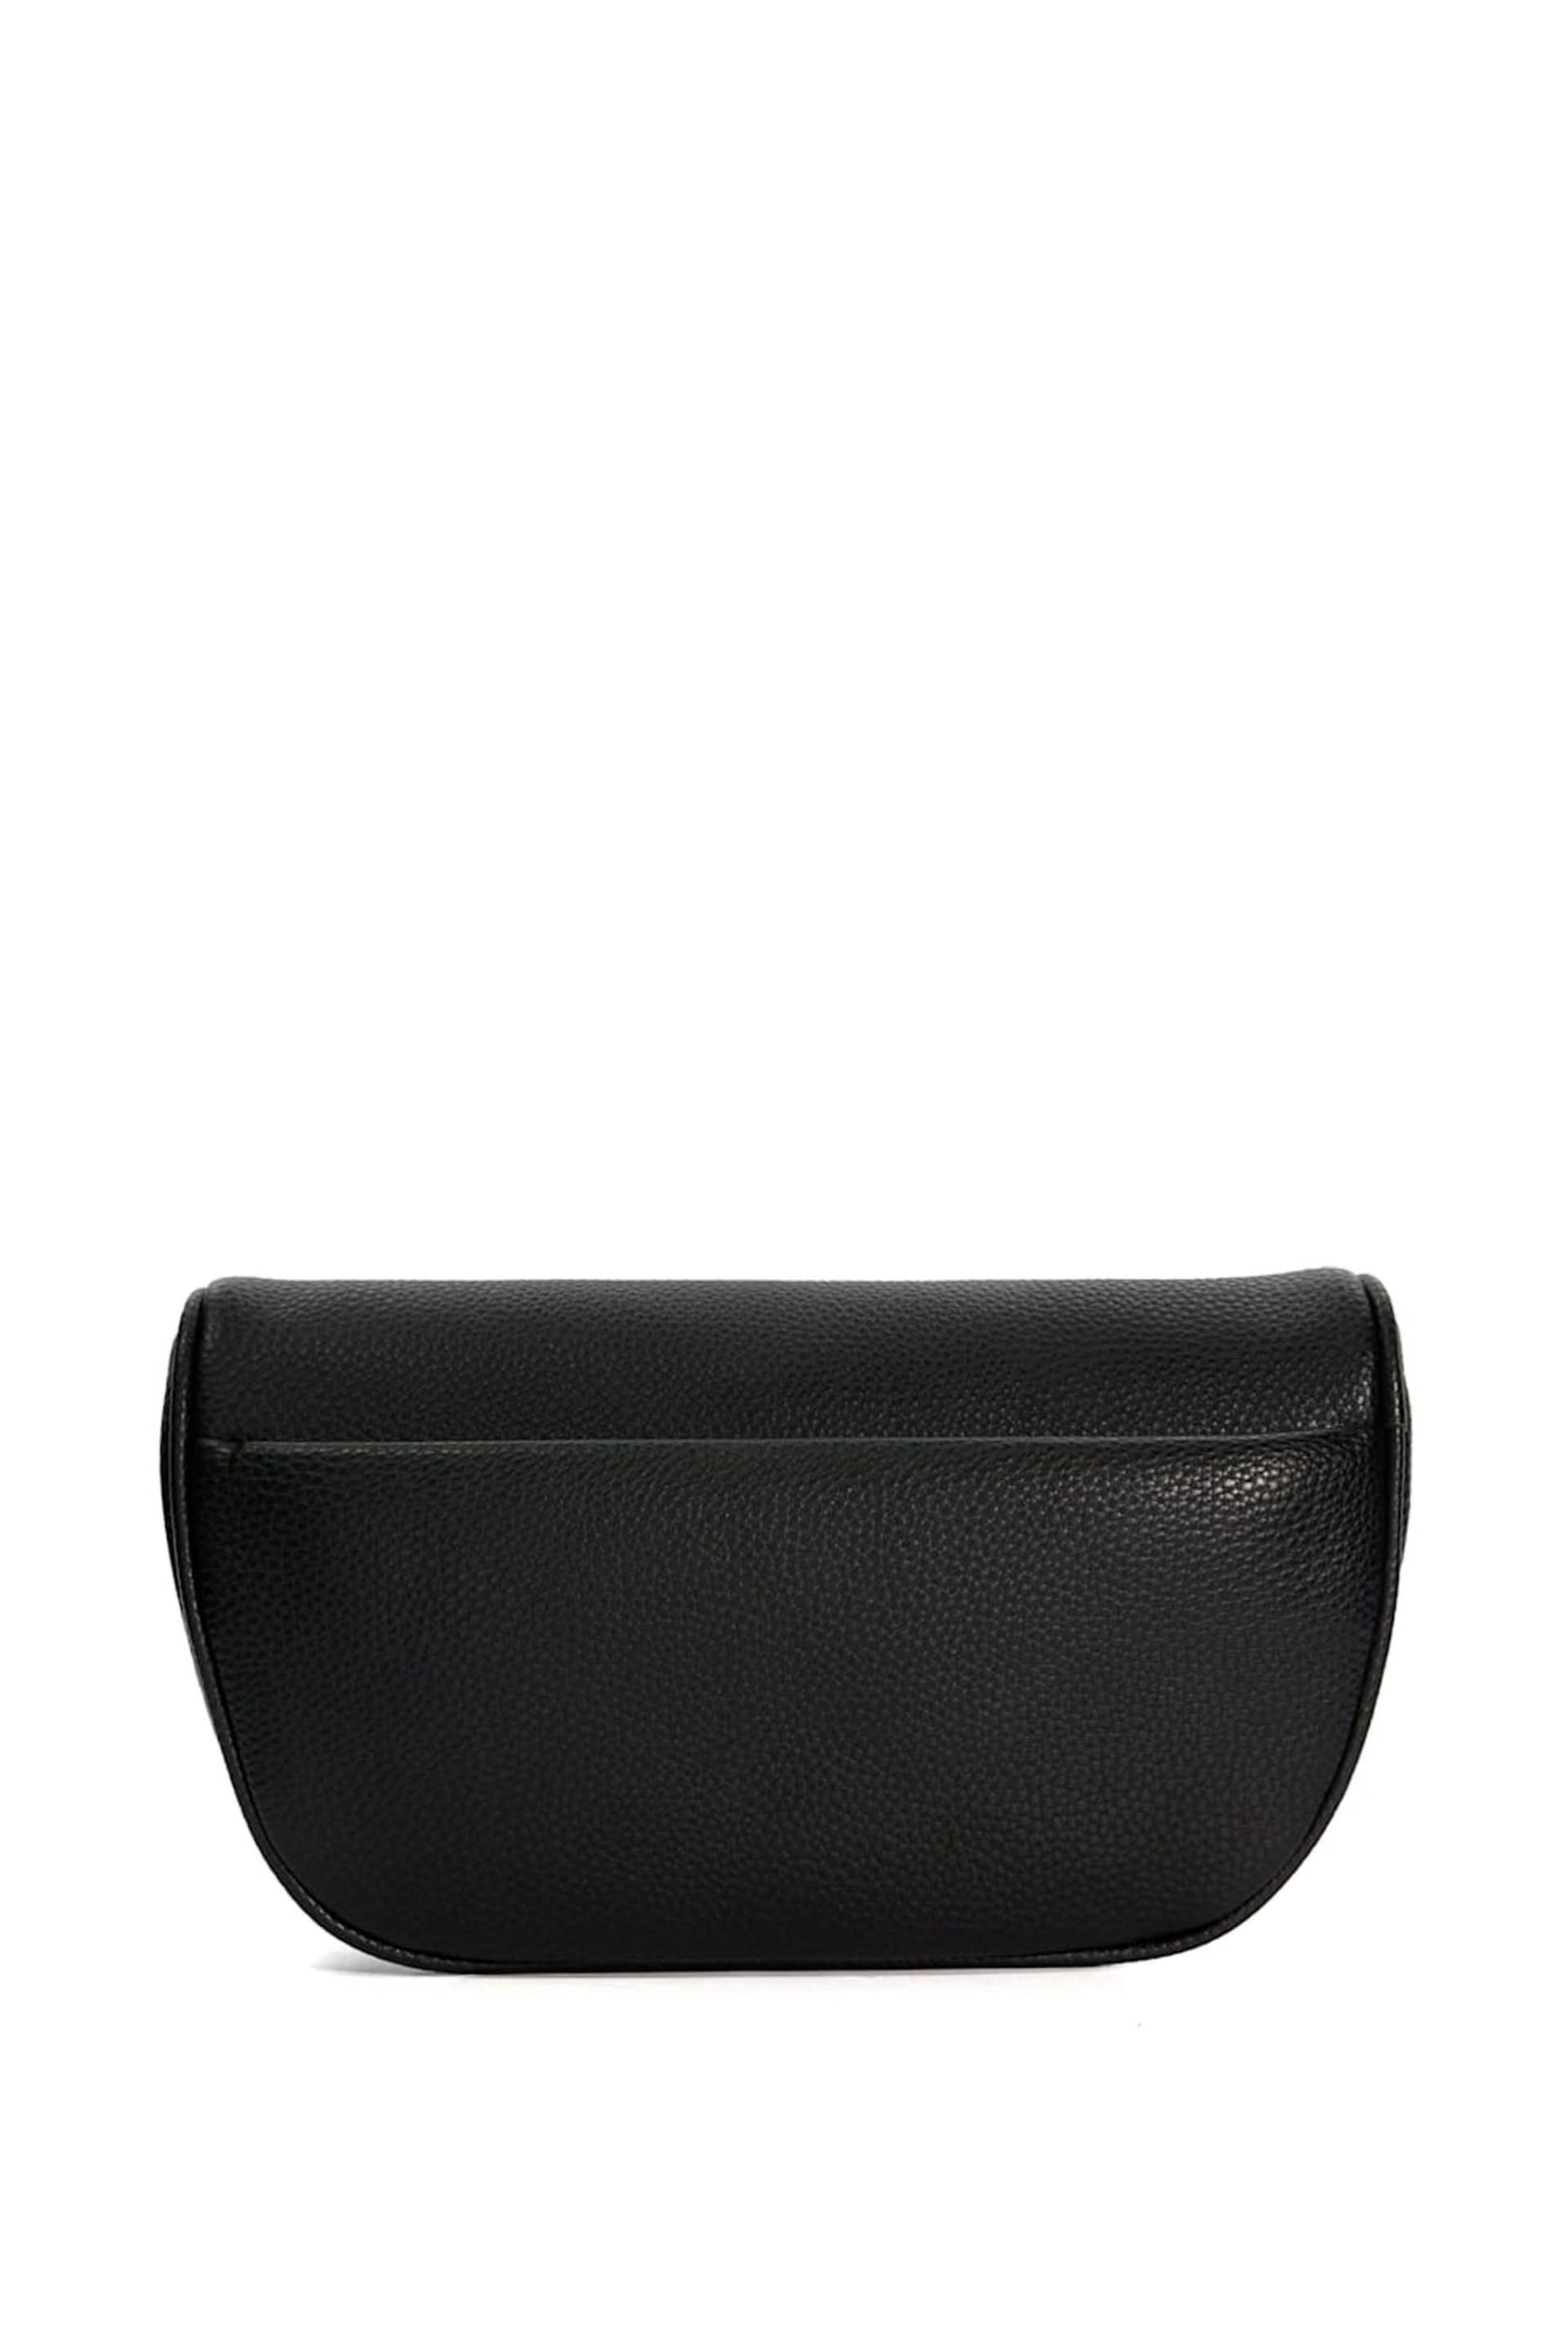 Dune London Black Small Dent Curved Cross-Body Bag - Image 4 of 6